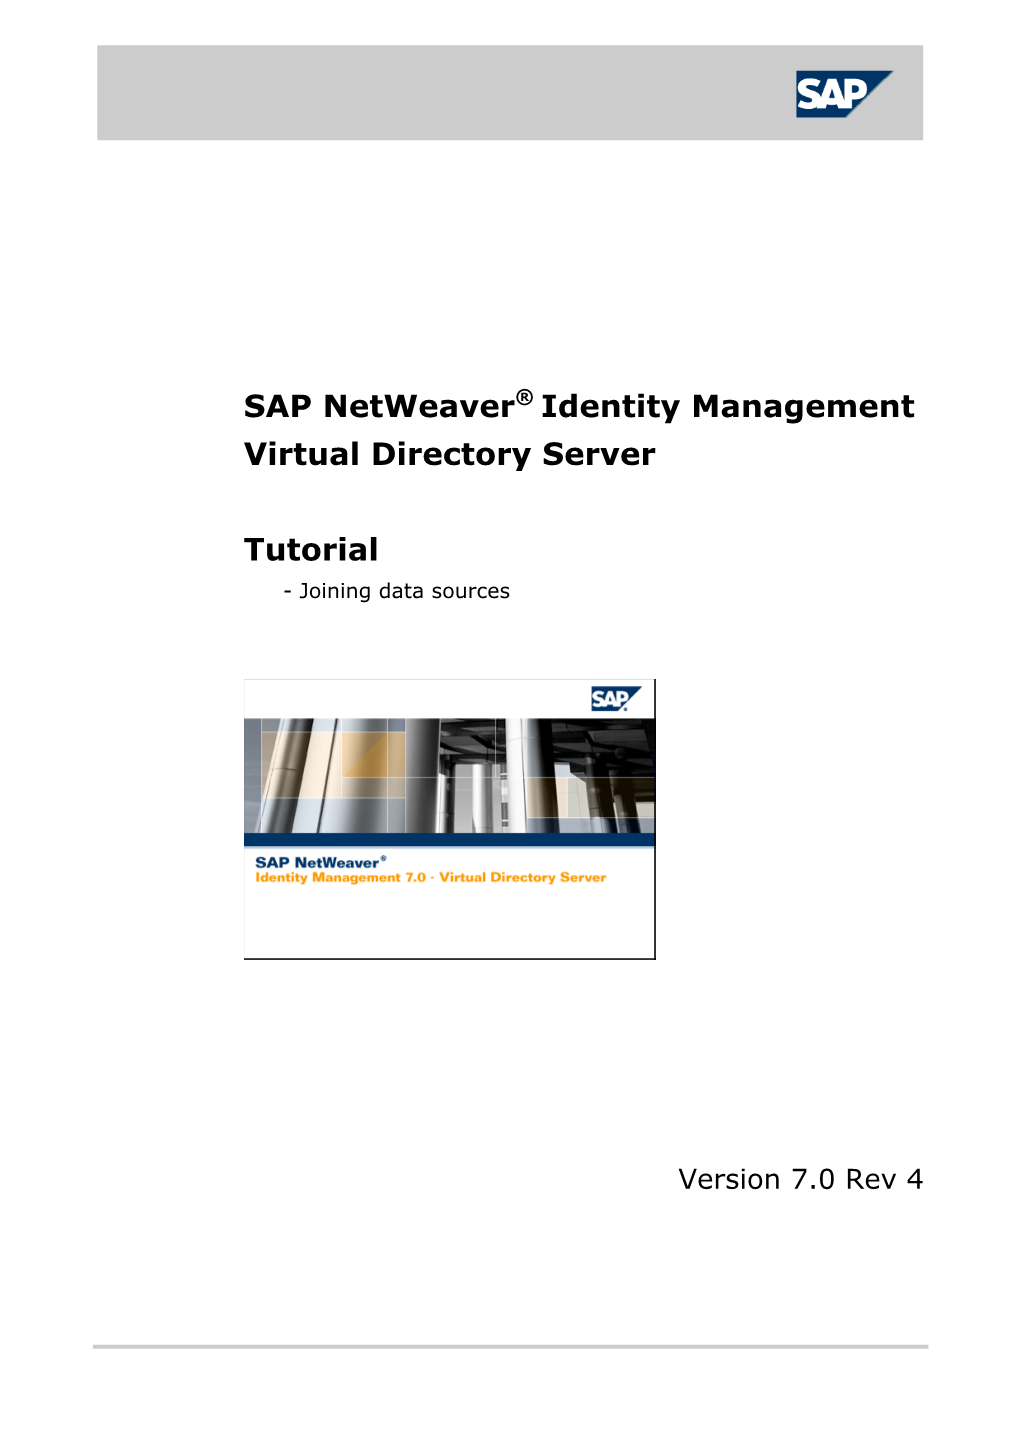 SAP Netweaver Identity Management Virtual Directory Server Tutorial - Joining Data Sources